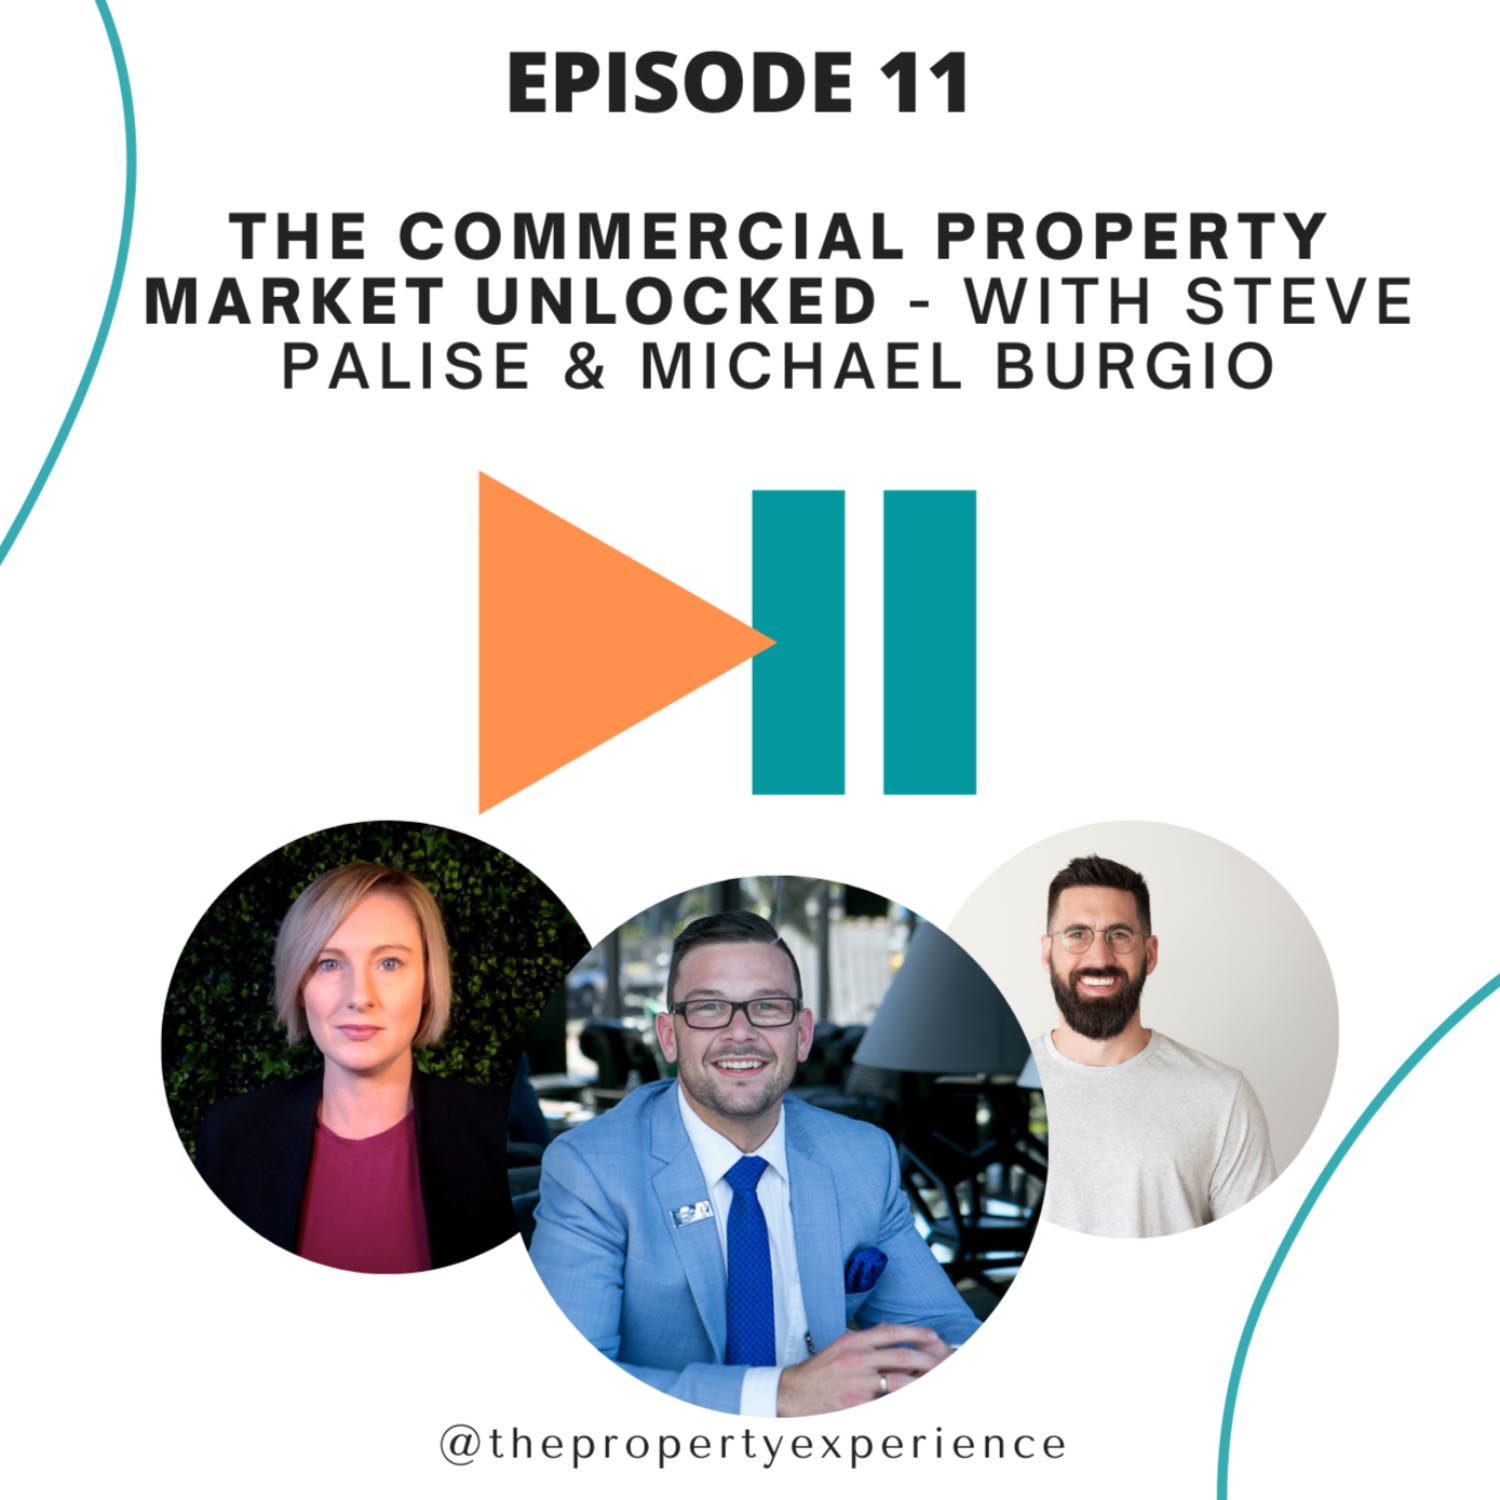 Commercial Property Market Unlocked - With Steve Palise and Michael Burgio